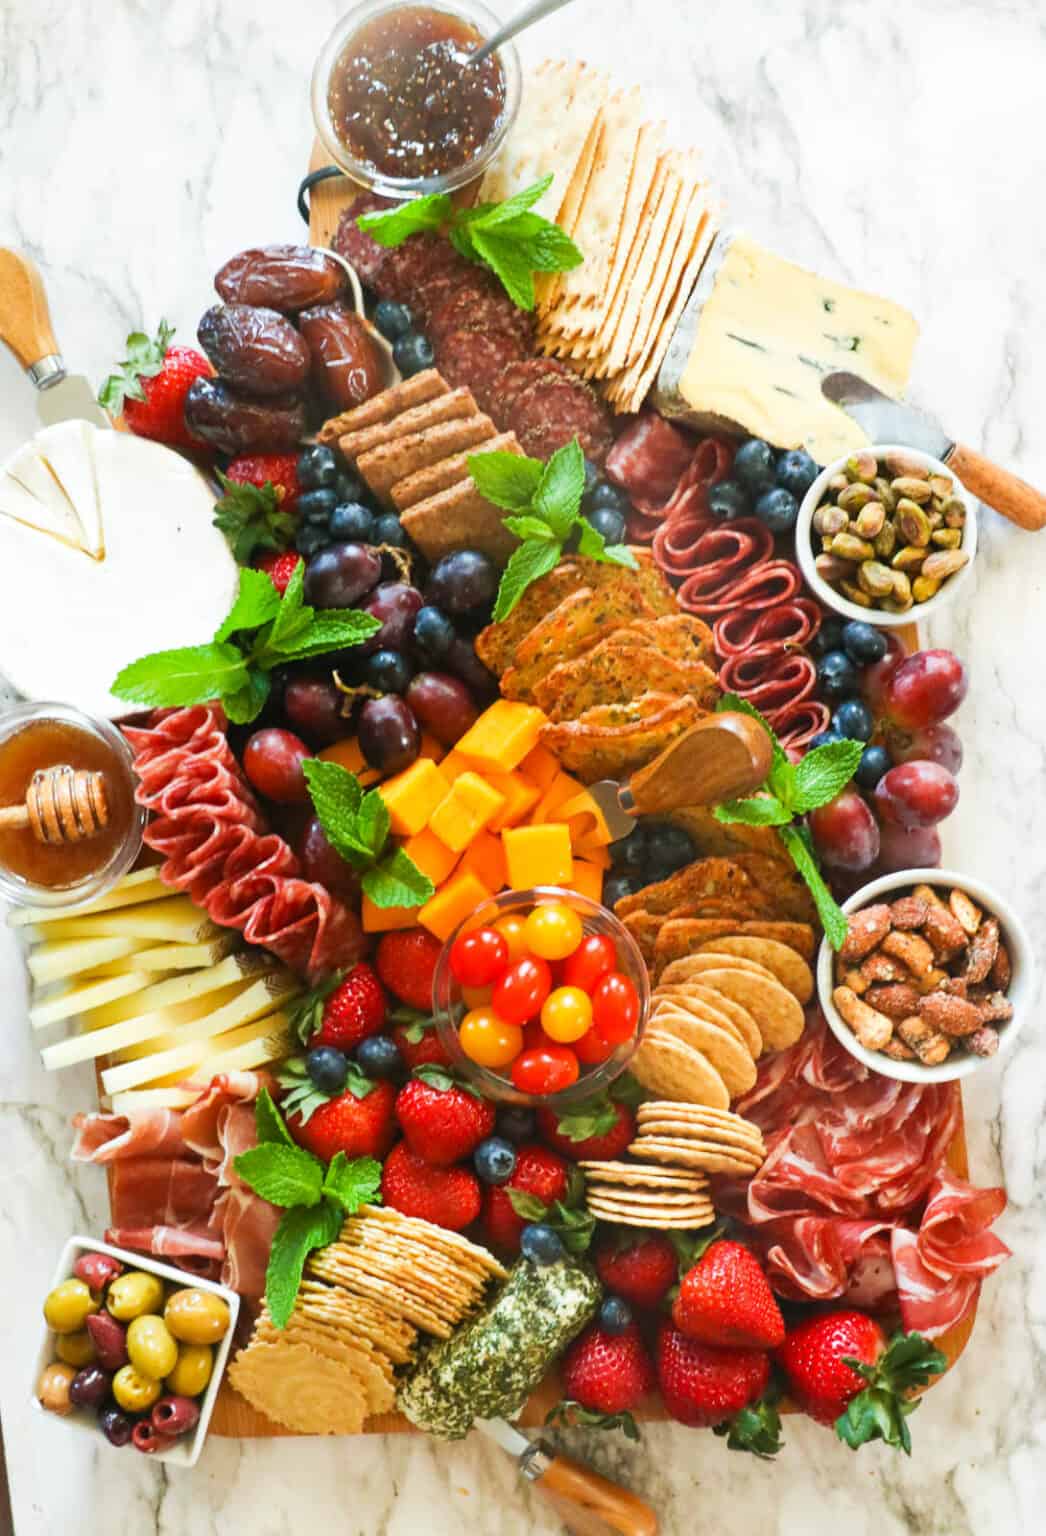 Charcuterie Board Ideas - Immaculate Bites